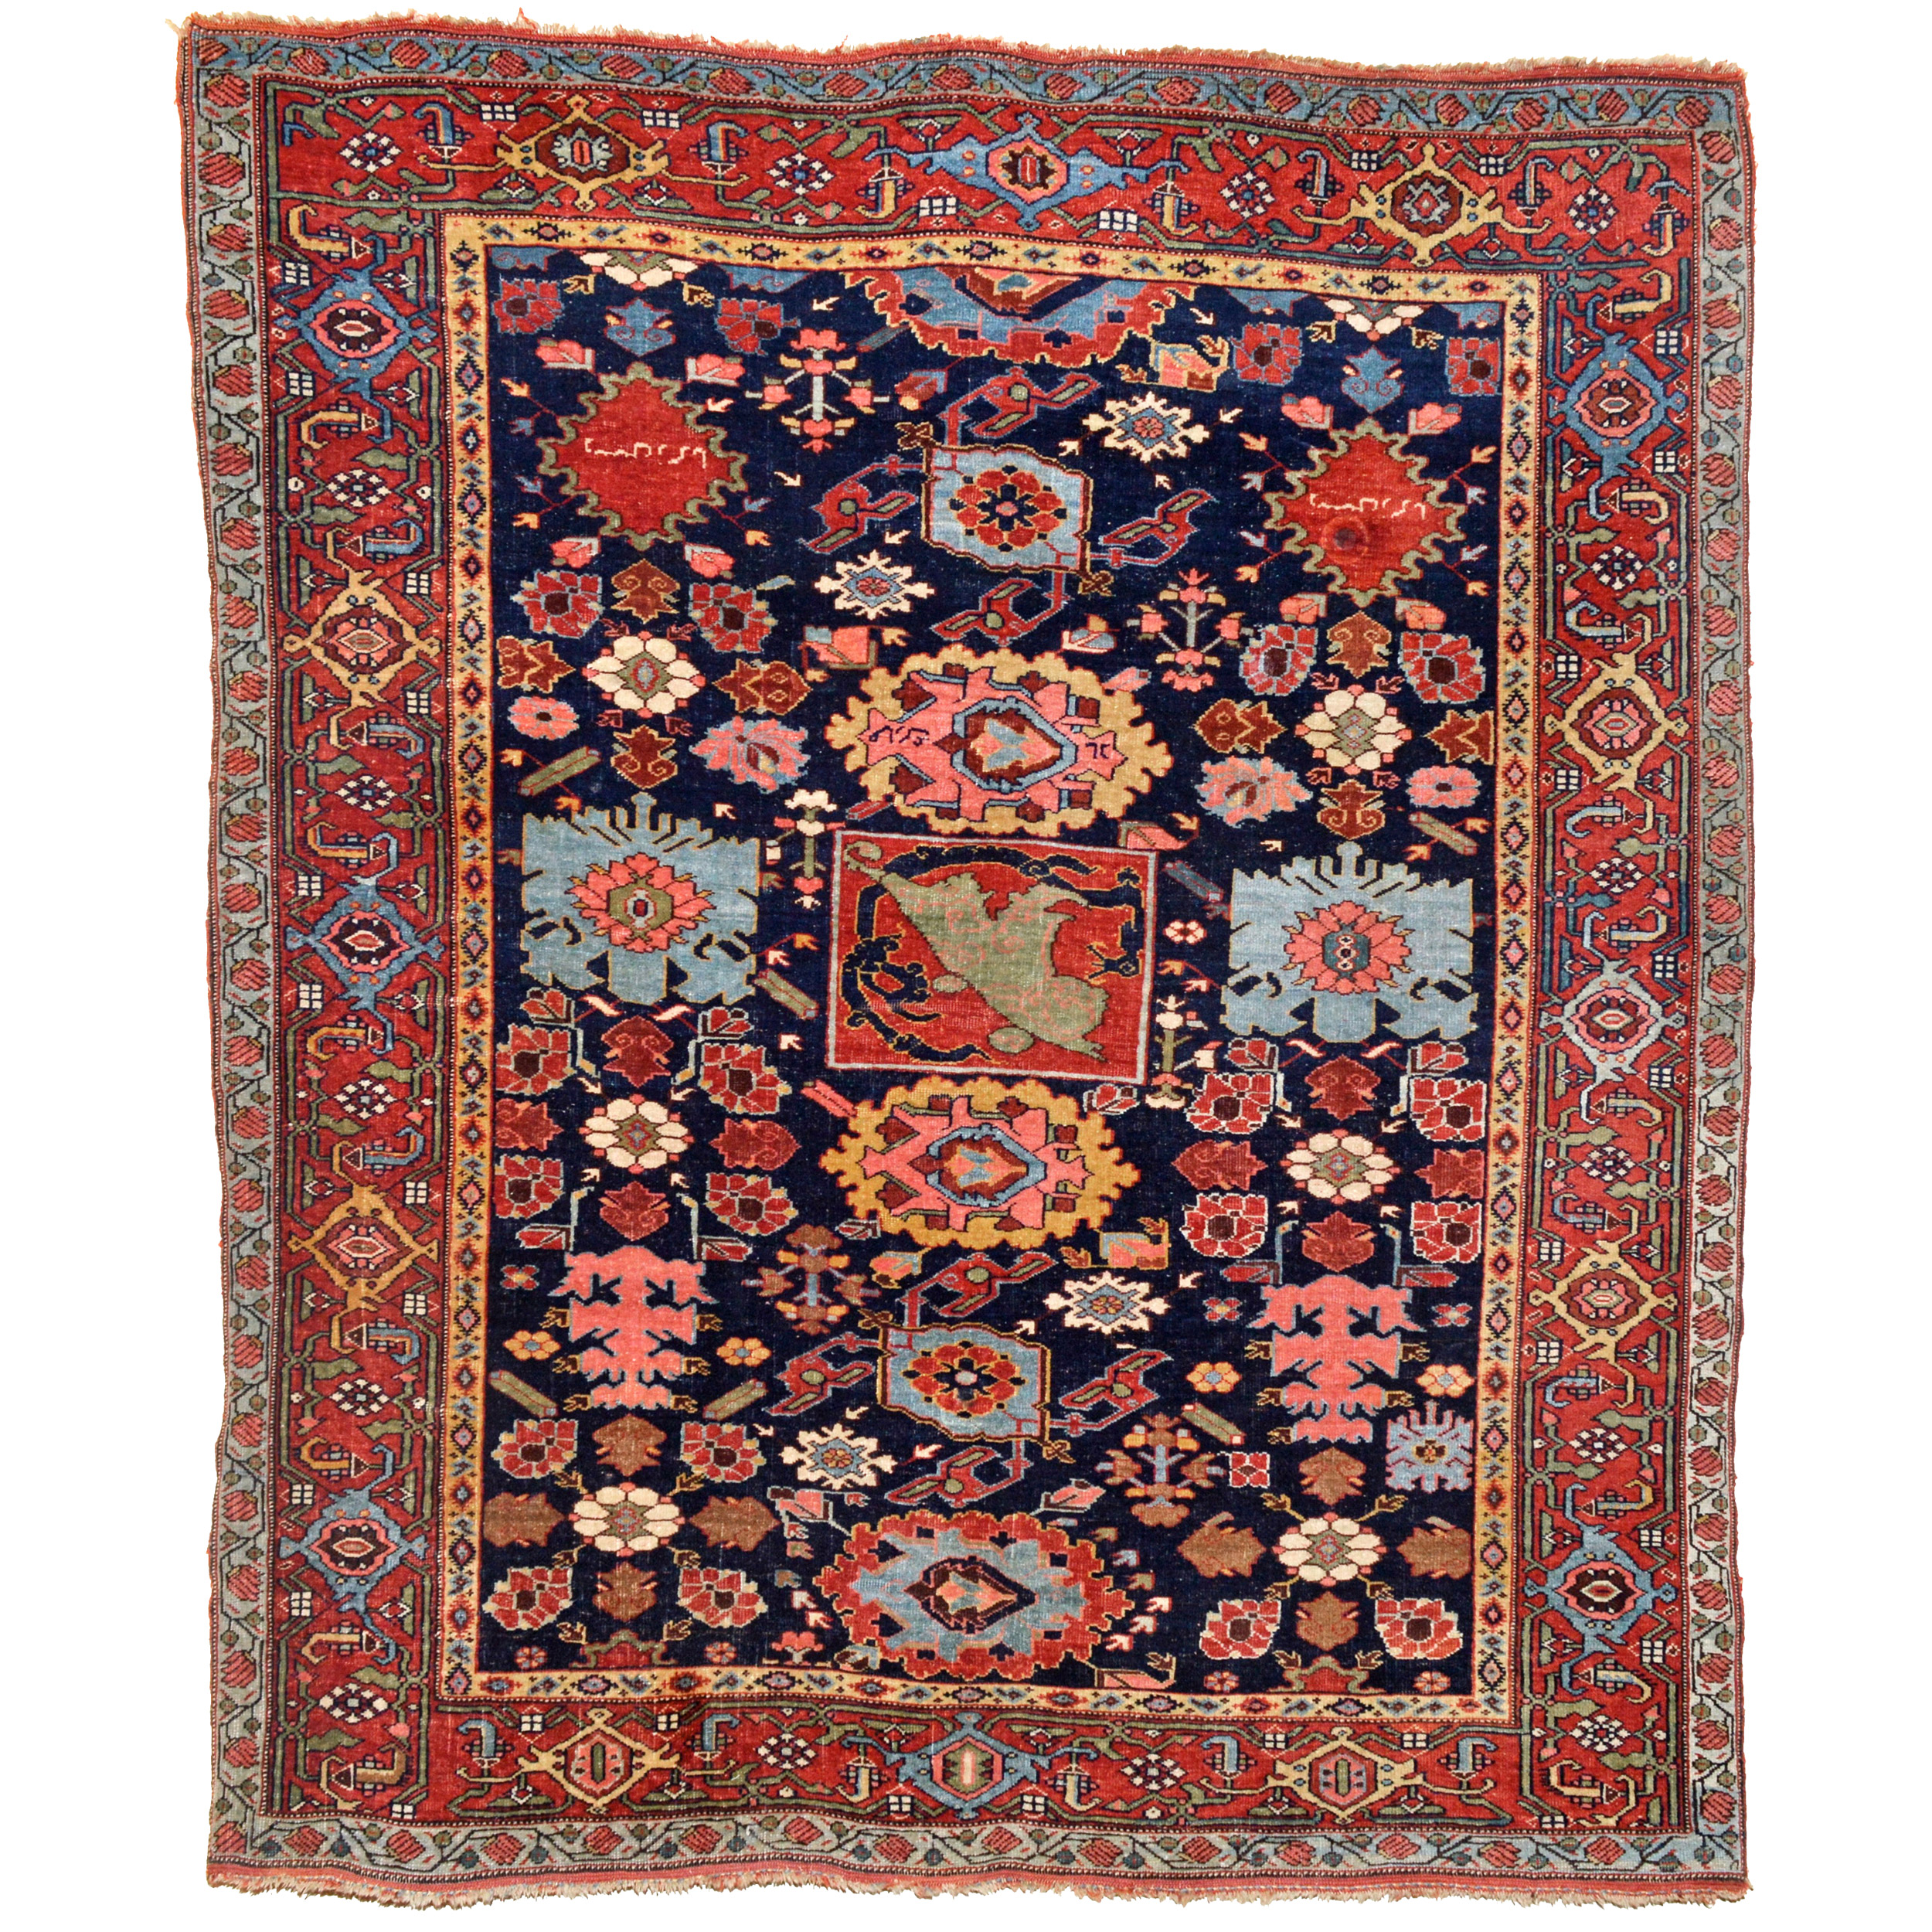 An outstanding antique Persian Bidjar rug with the classic Harshang design on a navy blue field - Douglas Stock Gallery, antique Oriental rugs, Boston,MA area, South Natick, antique rugs New England, antique carpets United States